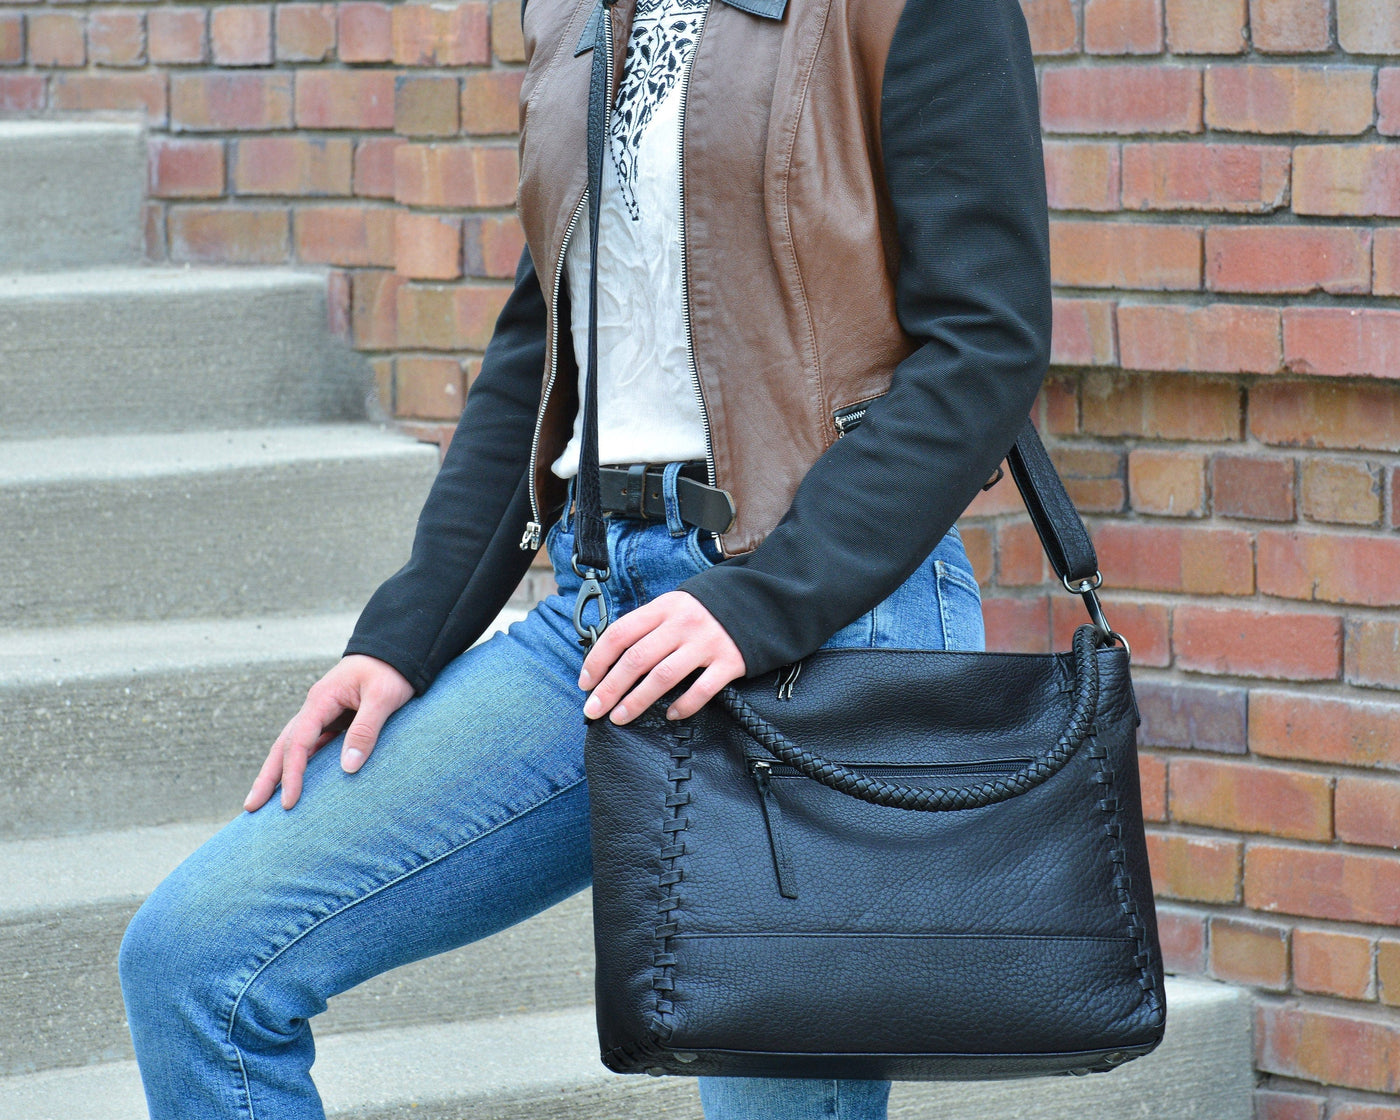 Concealed Carry Lacey Leather Tote - Lady Conceal - Concealed Carry Purse - Lady Conceal Black